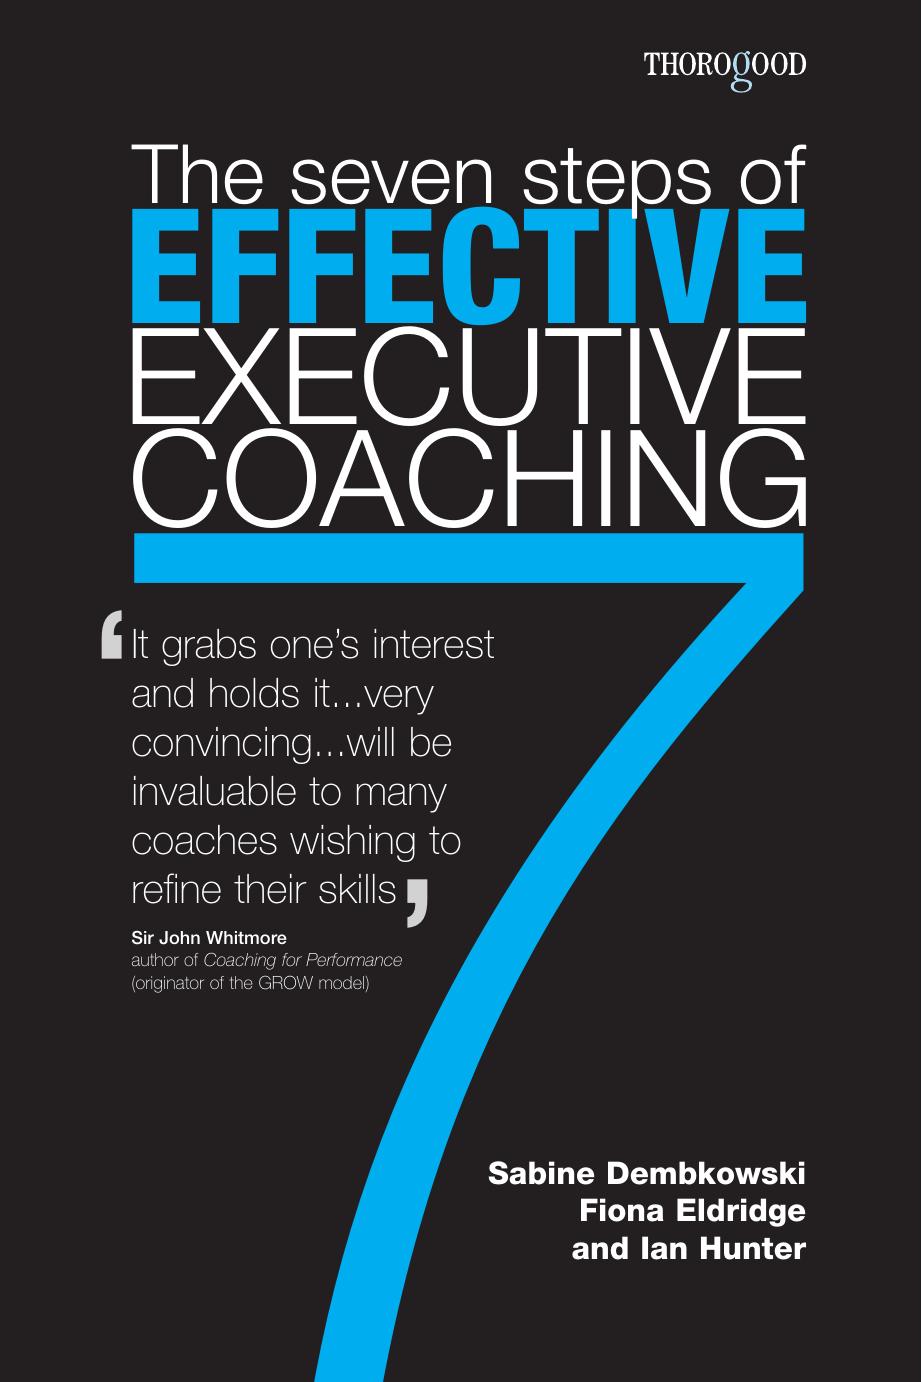 The Seven Steps of Effective Executive Coaching